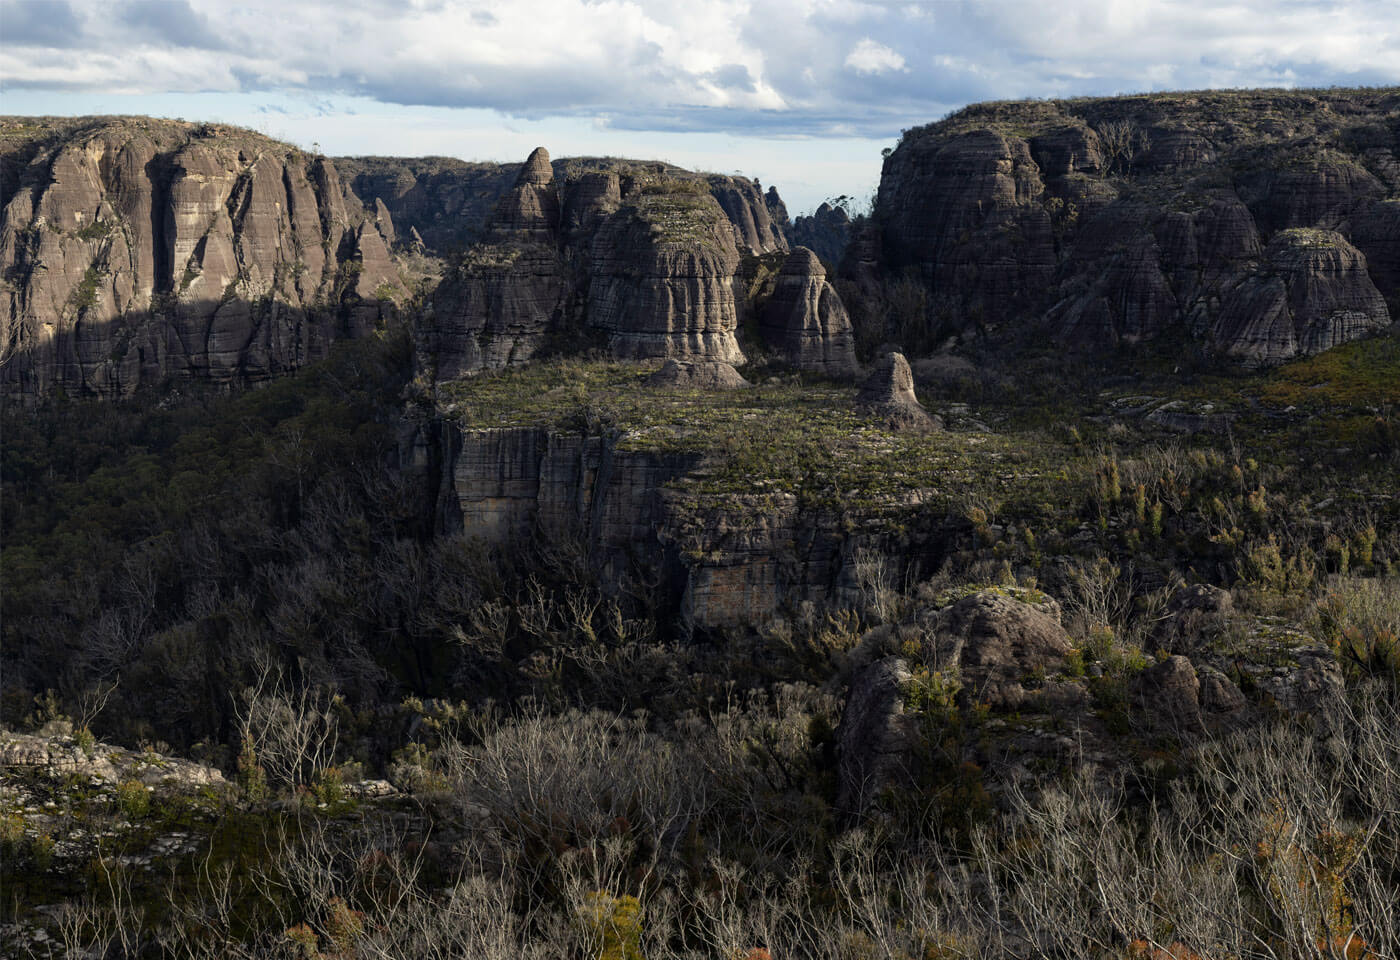 Image of a canyon taken by Andrew Kaineder